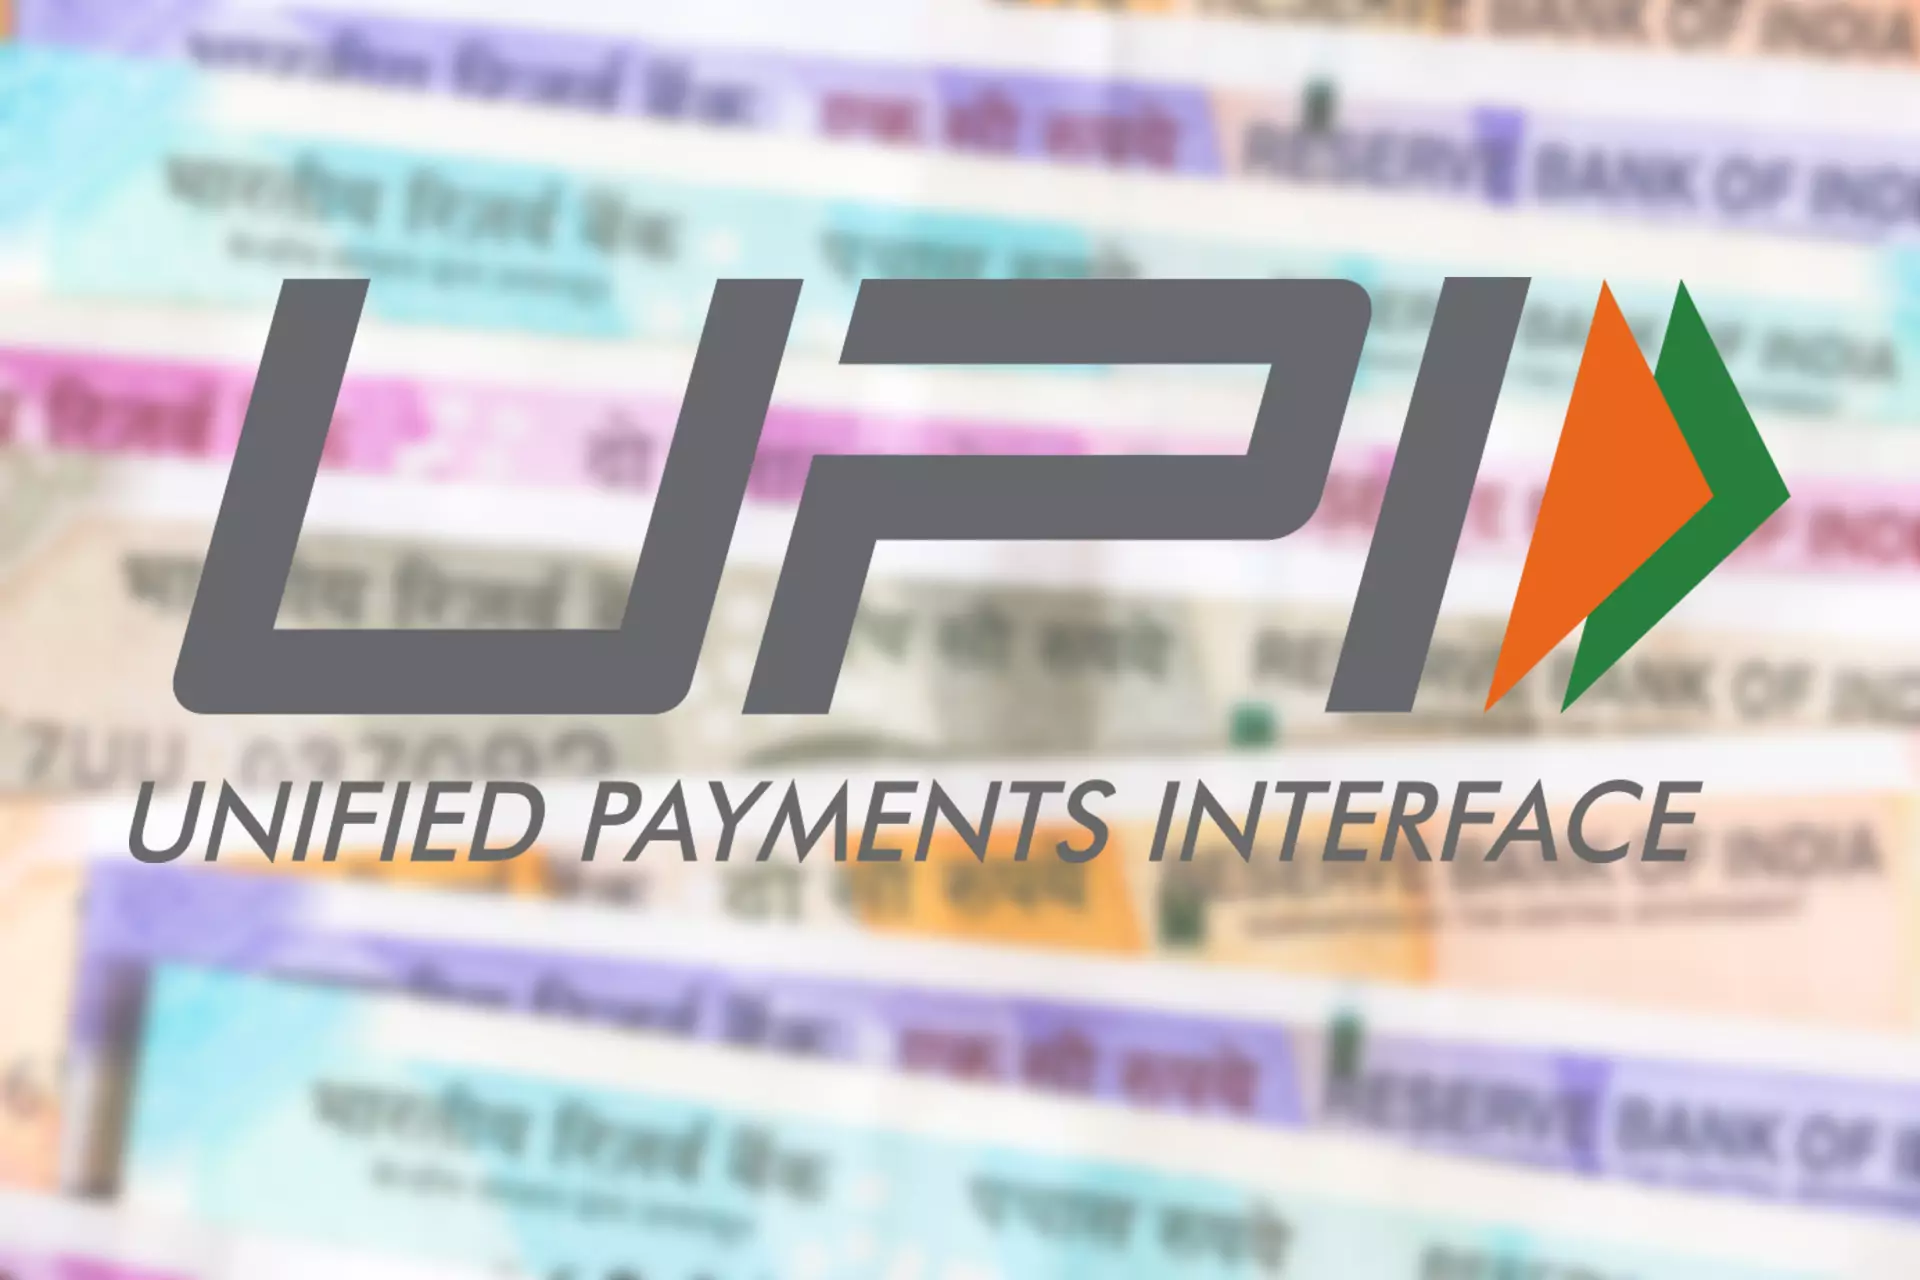 Use UPI to make a deposit to a cricket betting site.